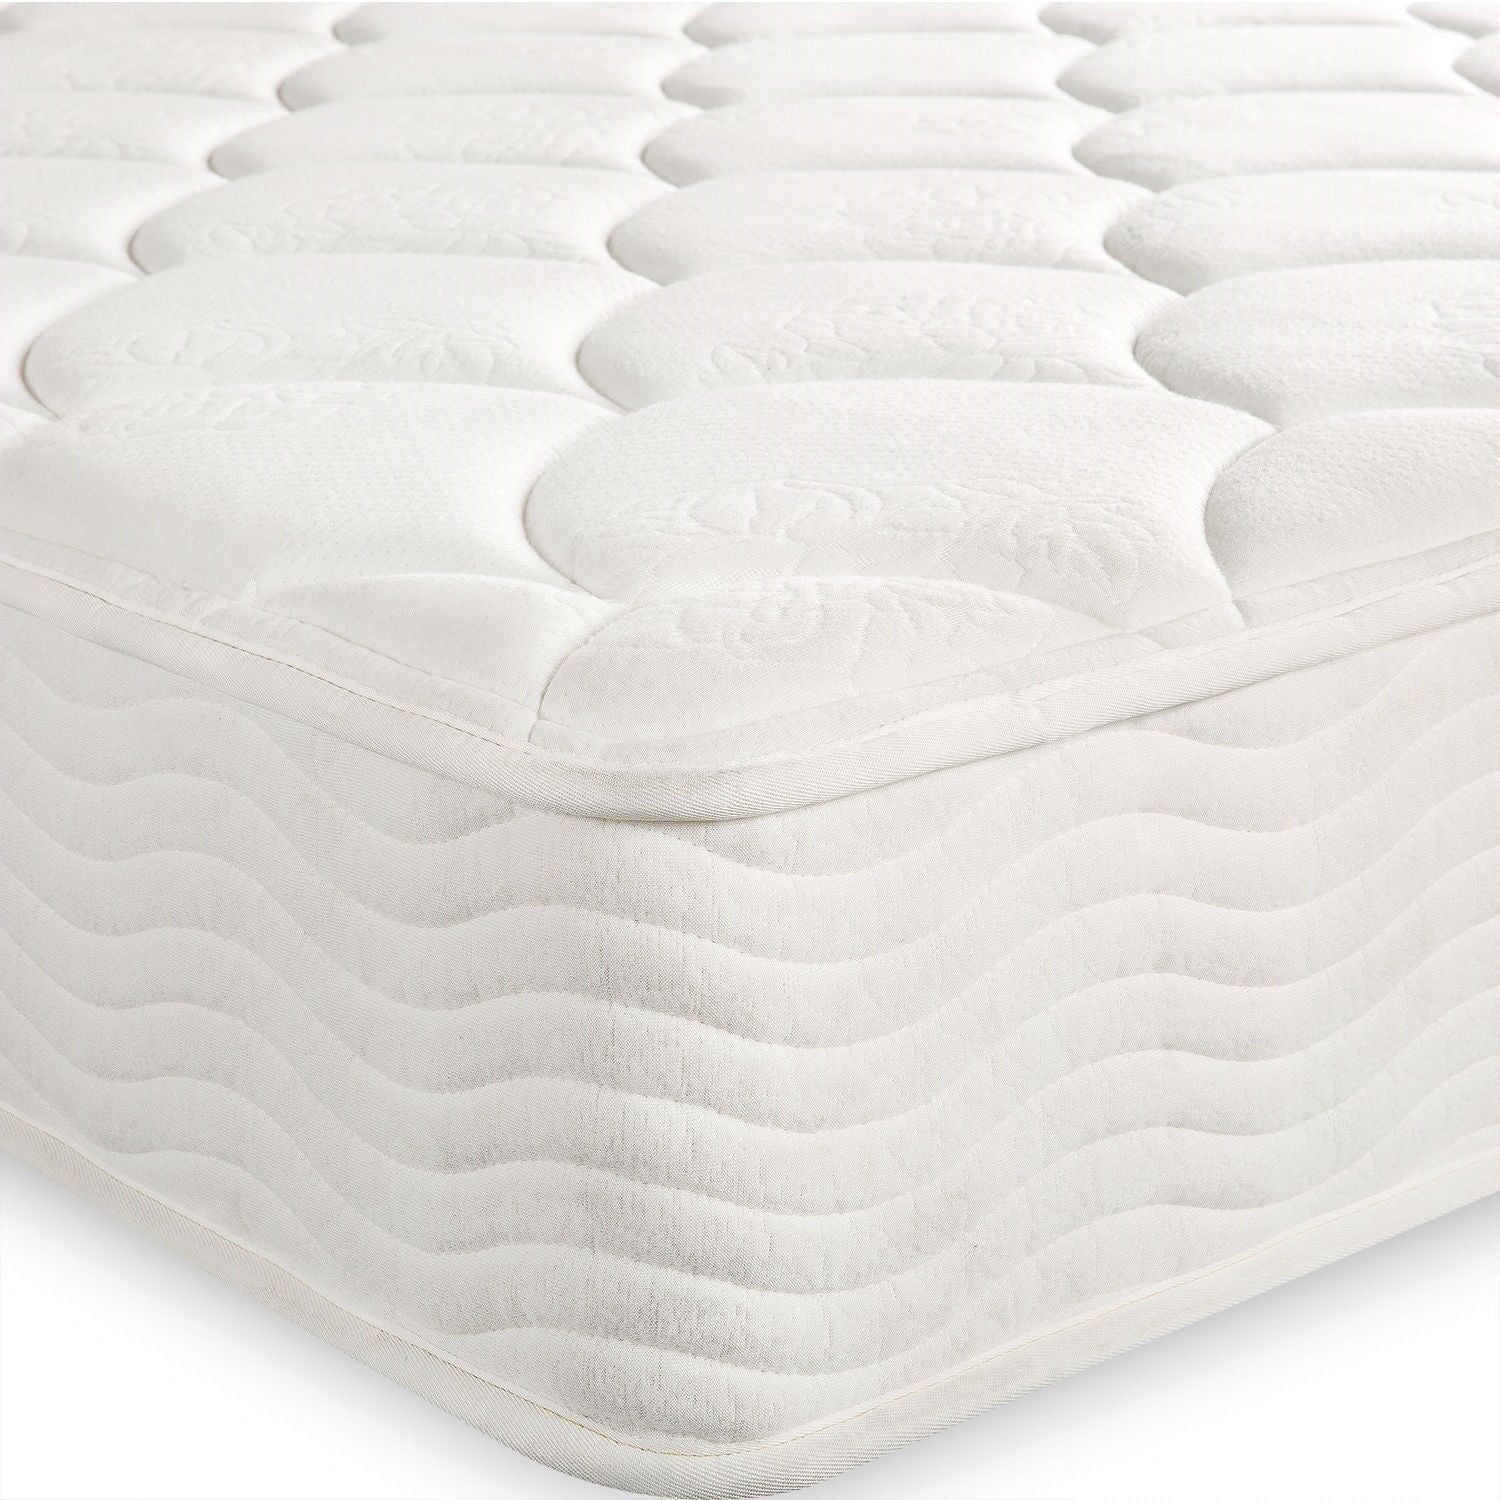 Bedroom > Mattresses - Queen Size 8-inch Pocketed Spring Mattress